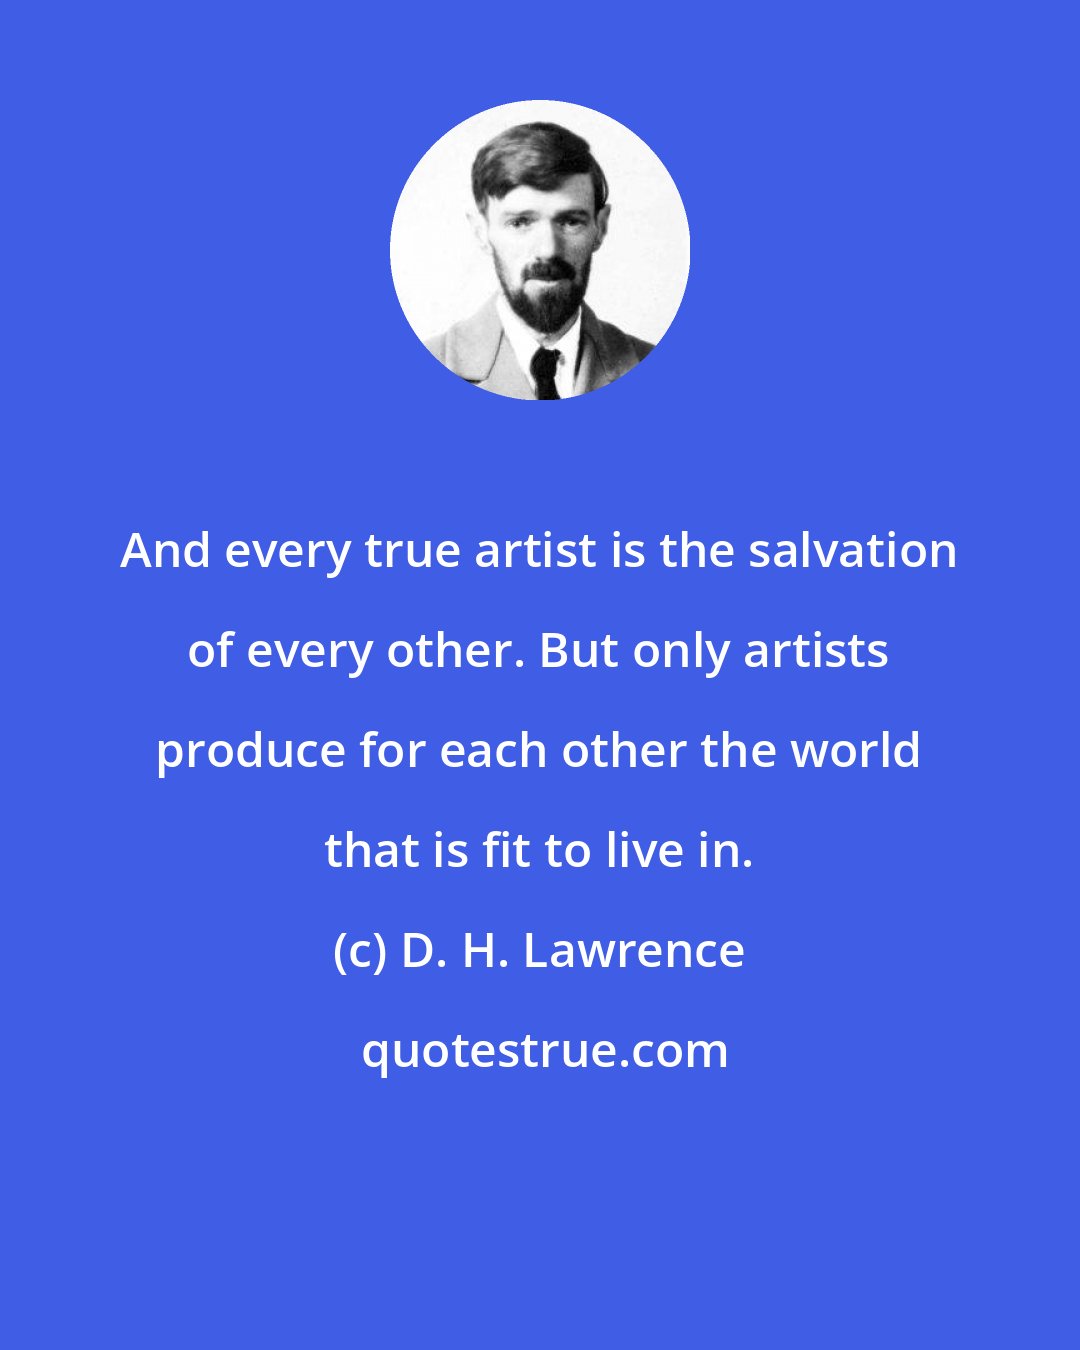 D. H. Lawrence: And every true artist is the salvation of every other. But only artists produce for each other the world that is fit to live in.